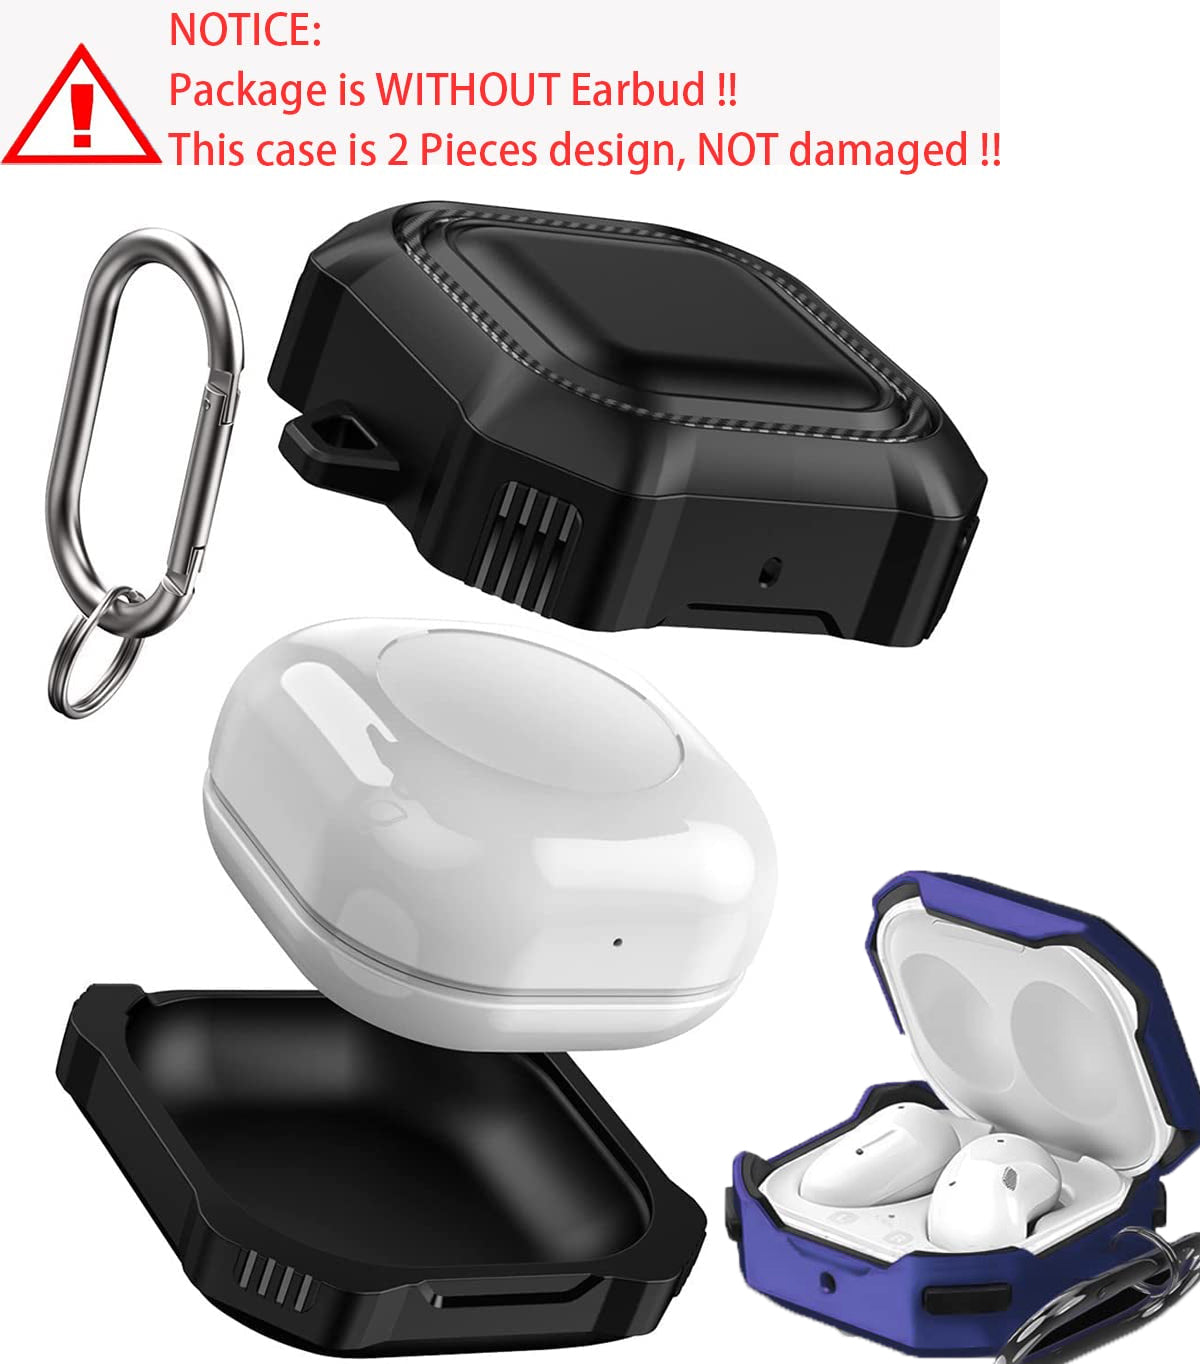 Verilux Fashion Hard Protective Cover for Samsung Galaxy Buds Pro(2021), Galaxy Buds 2, Galaxy Buds Live (2020), Shockproof Case Cover Full Body with Keychain (Without Earbud, Seperate Pieces Design)